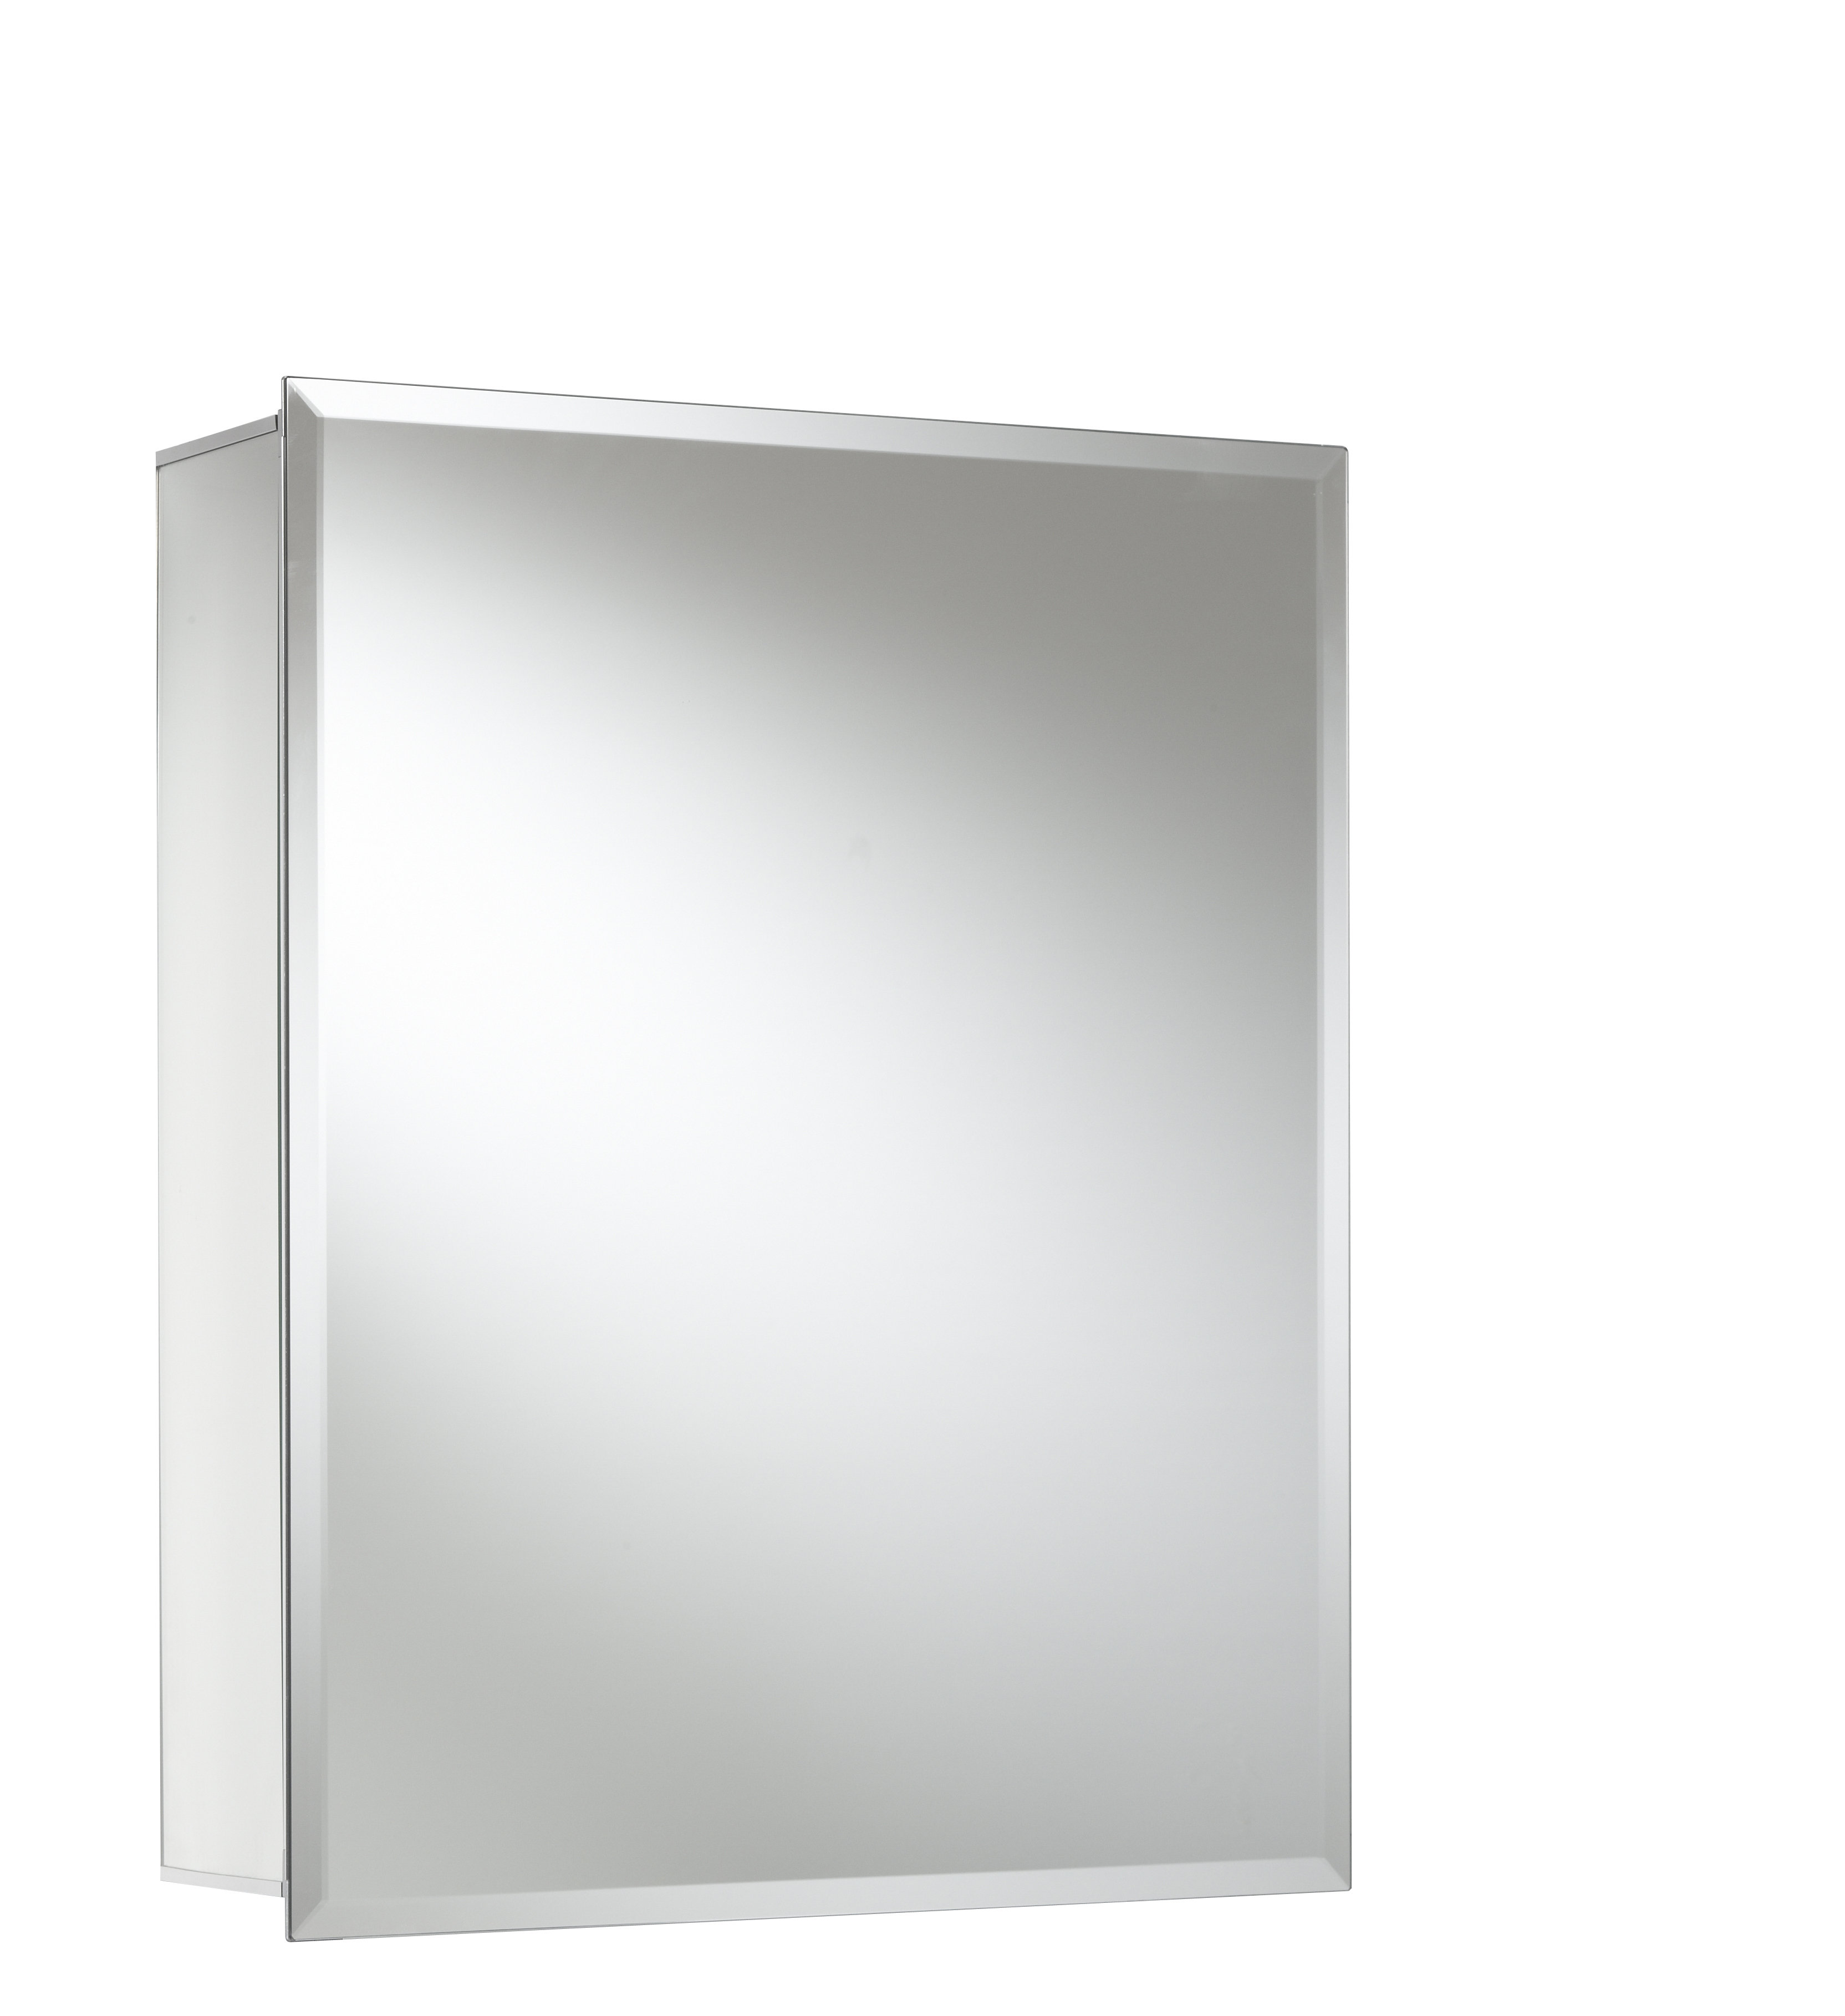 16 X 20 Recessed Or Surface Mount Medicine Cabinet Reviews